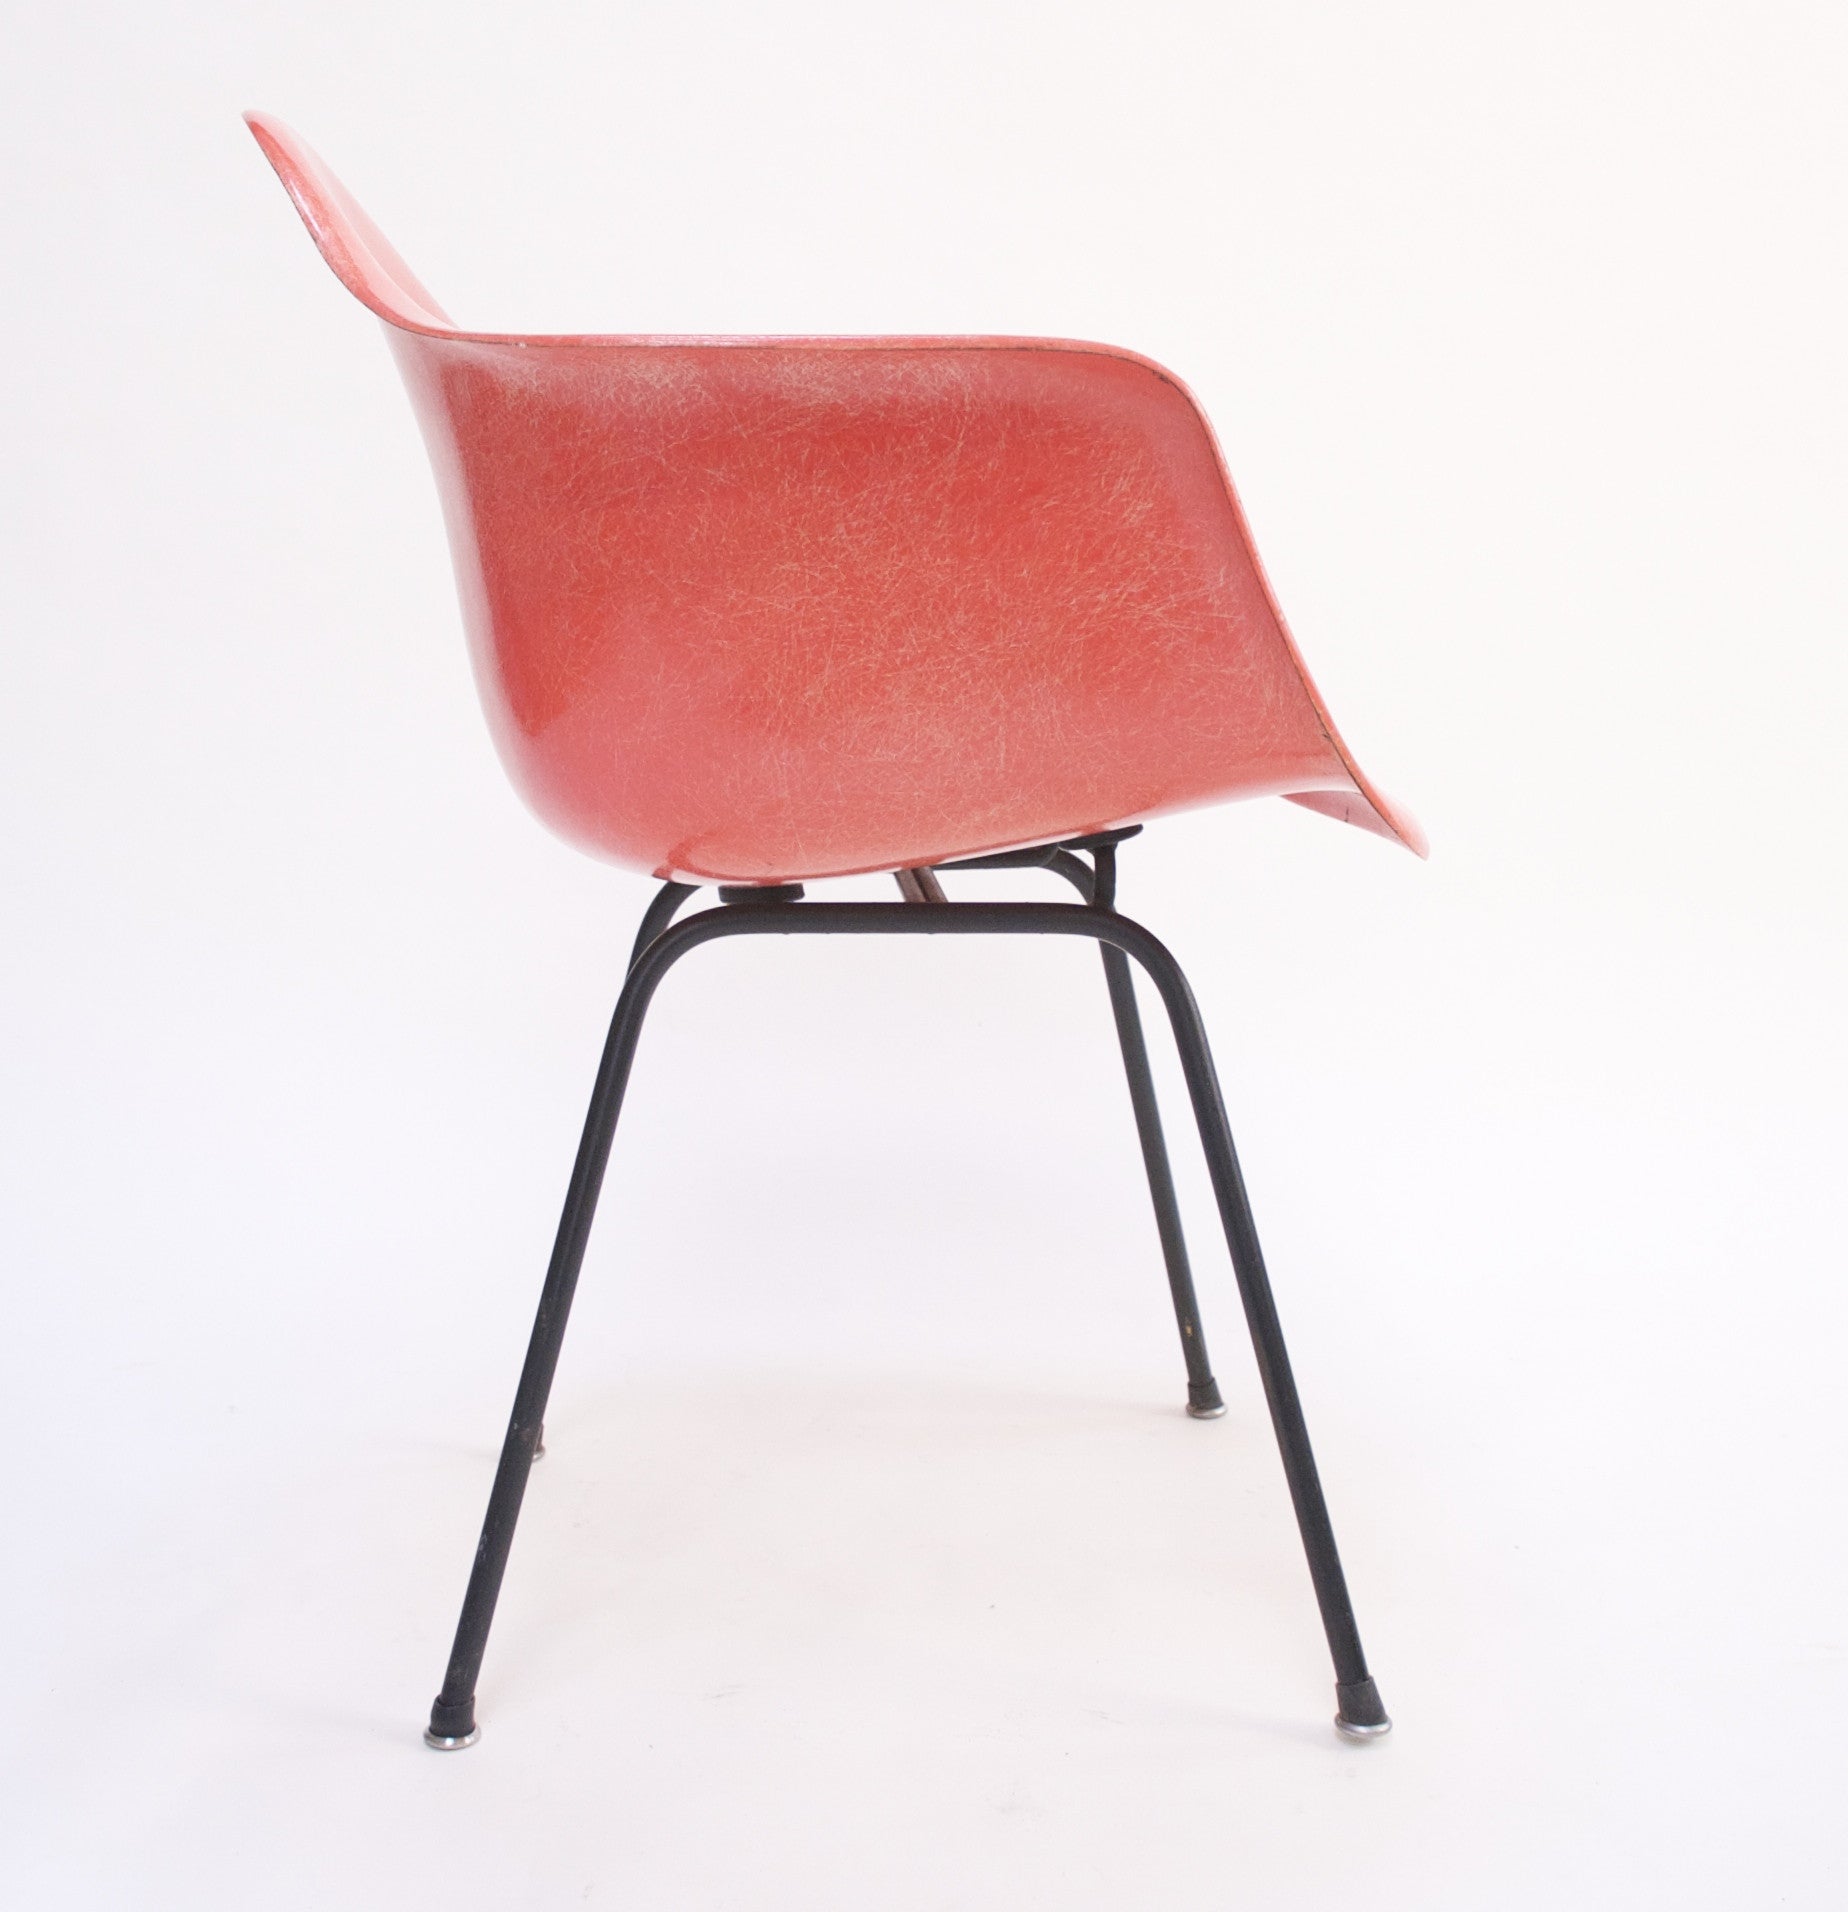 SOLD Red Eames Herman Miller Fiberglass Arm Shell Chair Early 1954